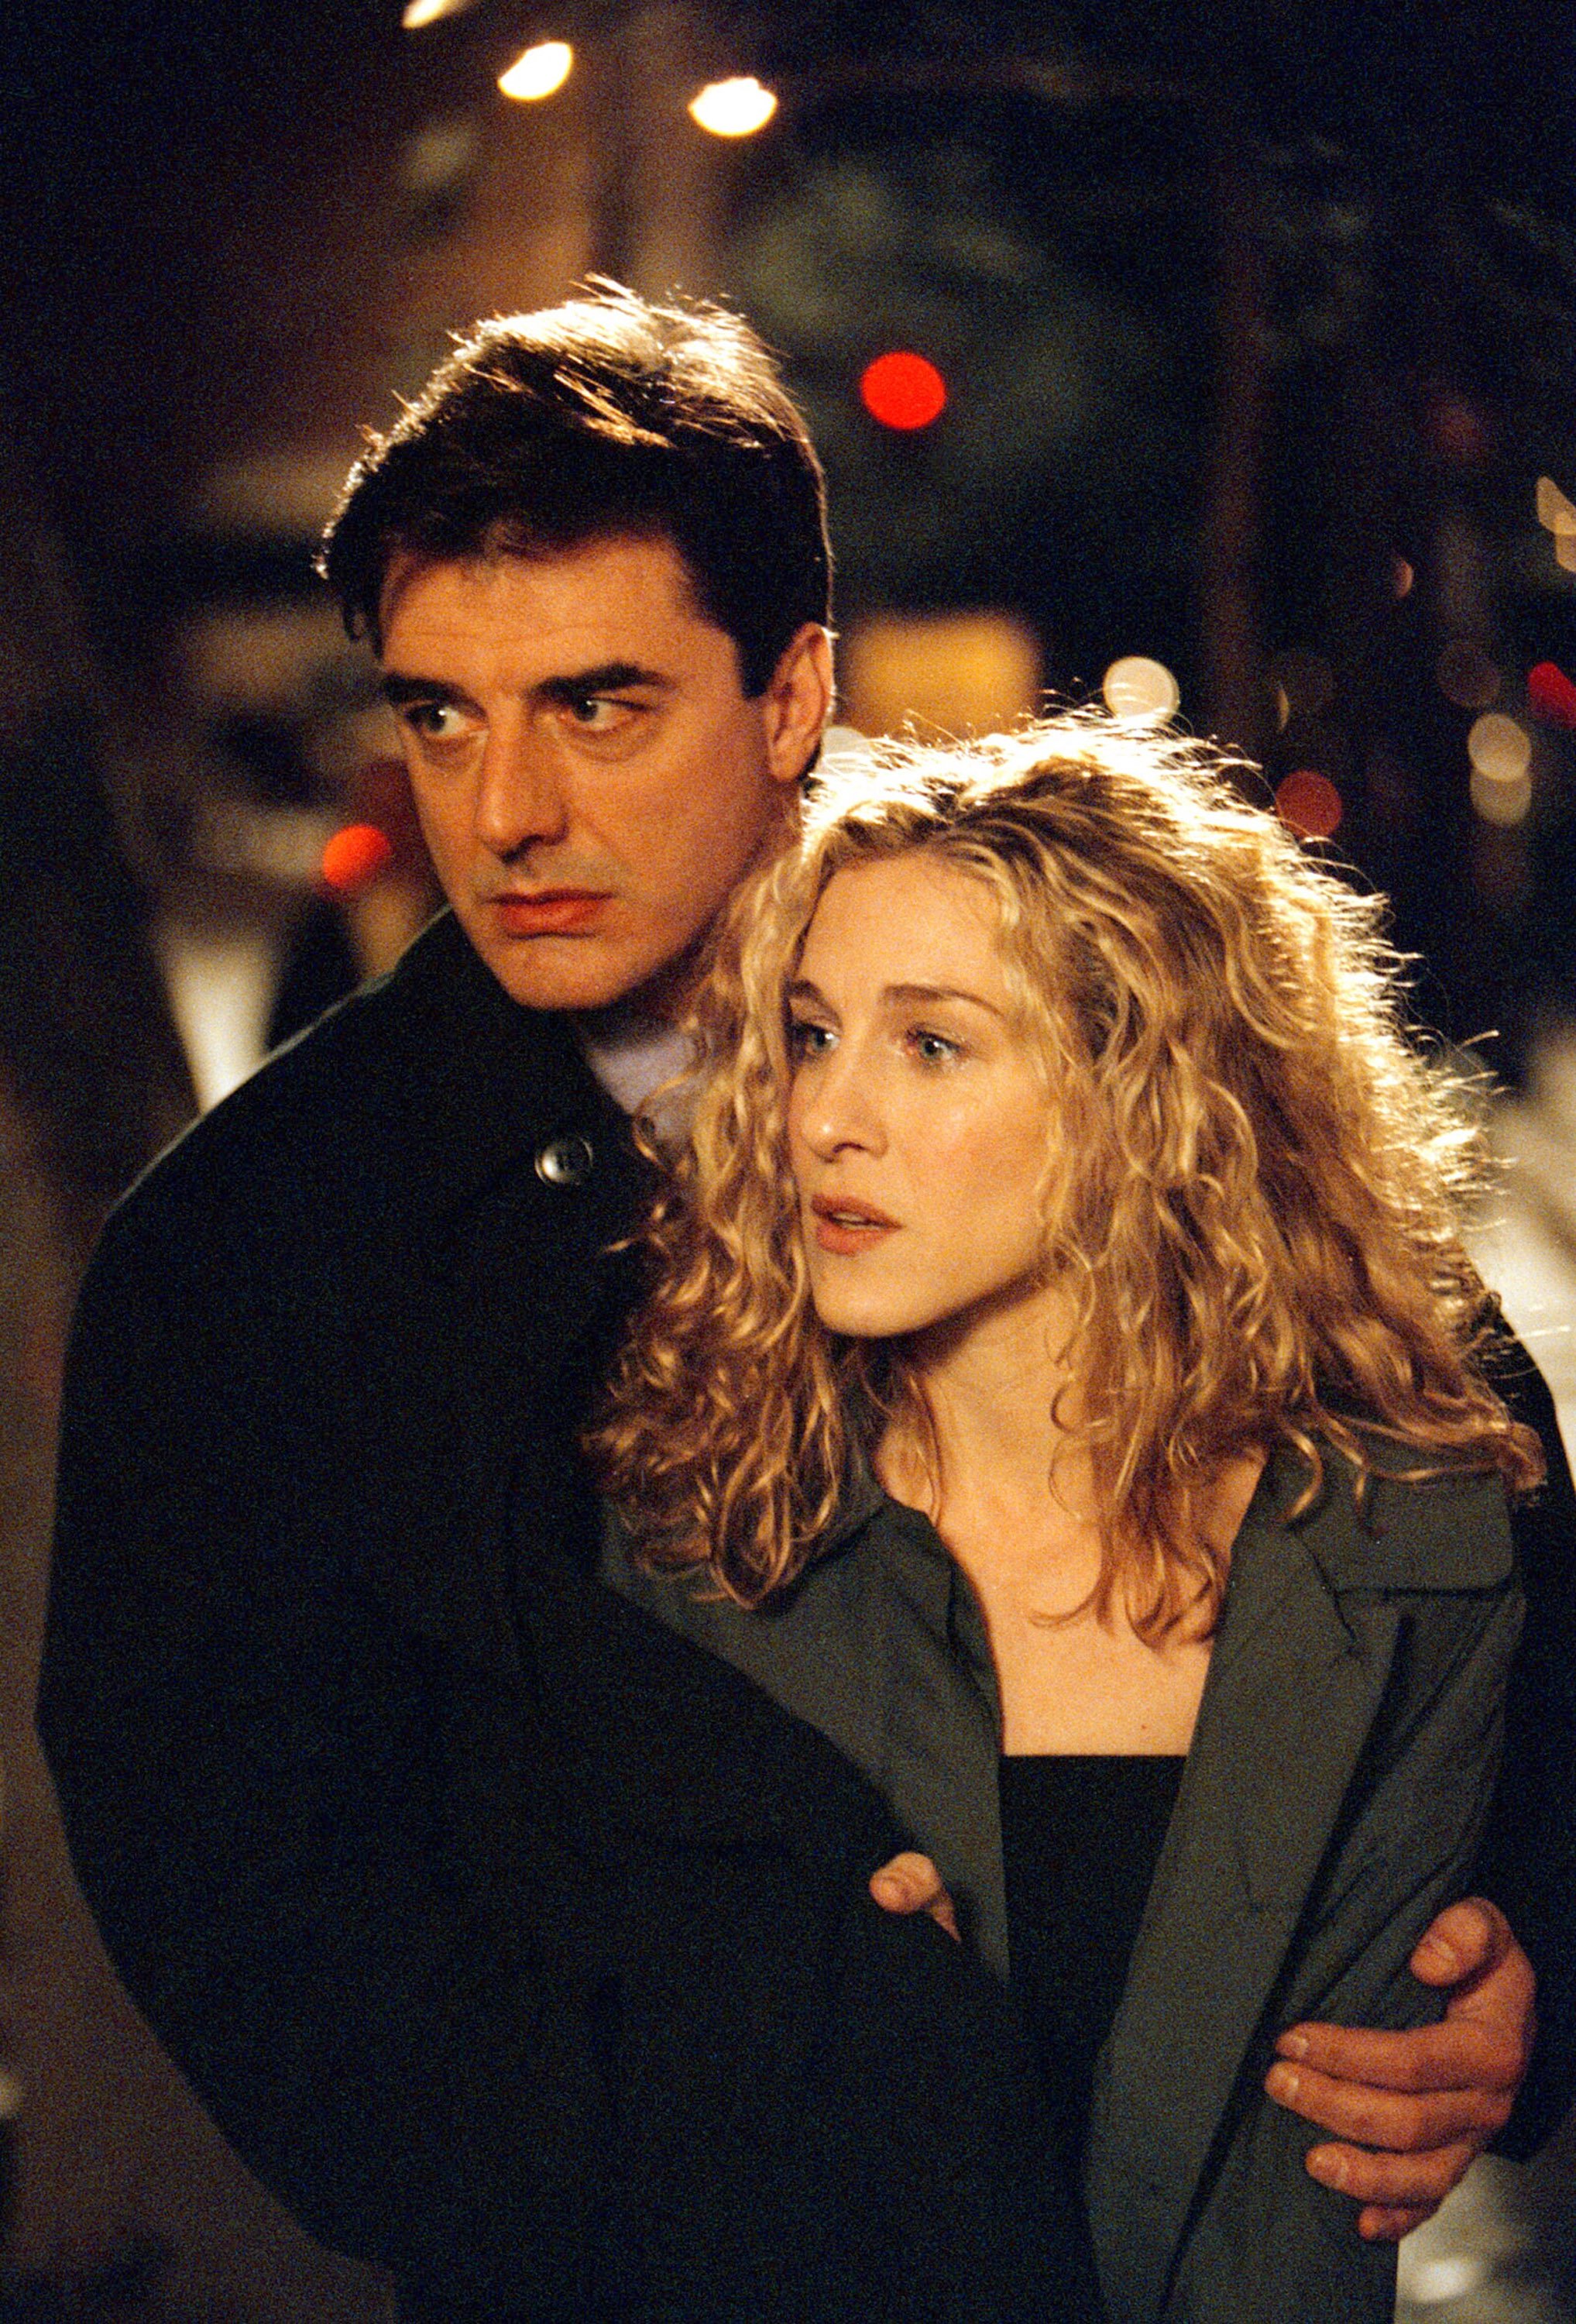 Chris Noth as Mr. Big and Sarah Jessica Parker as Carrie Bradshaw